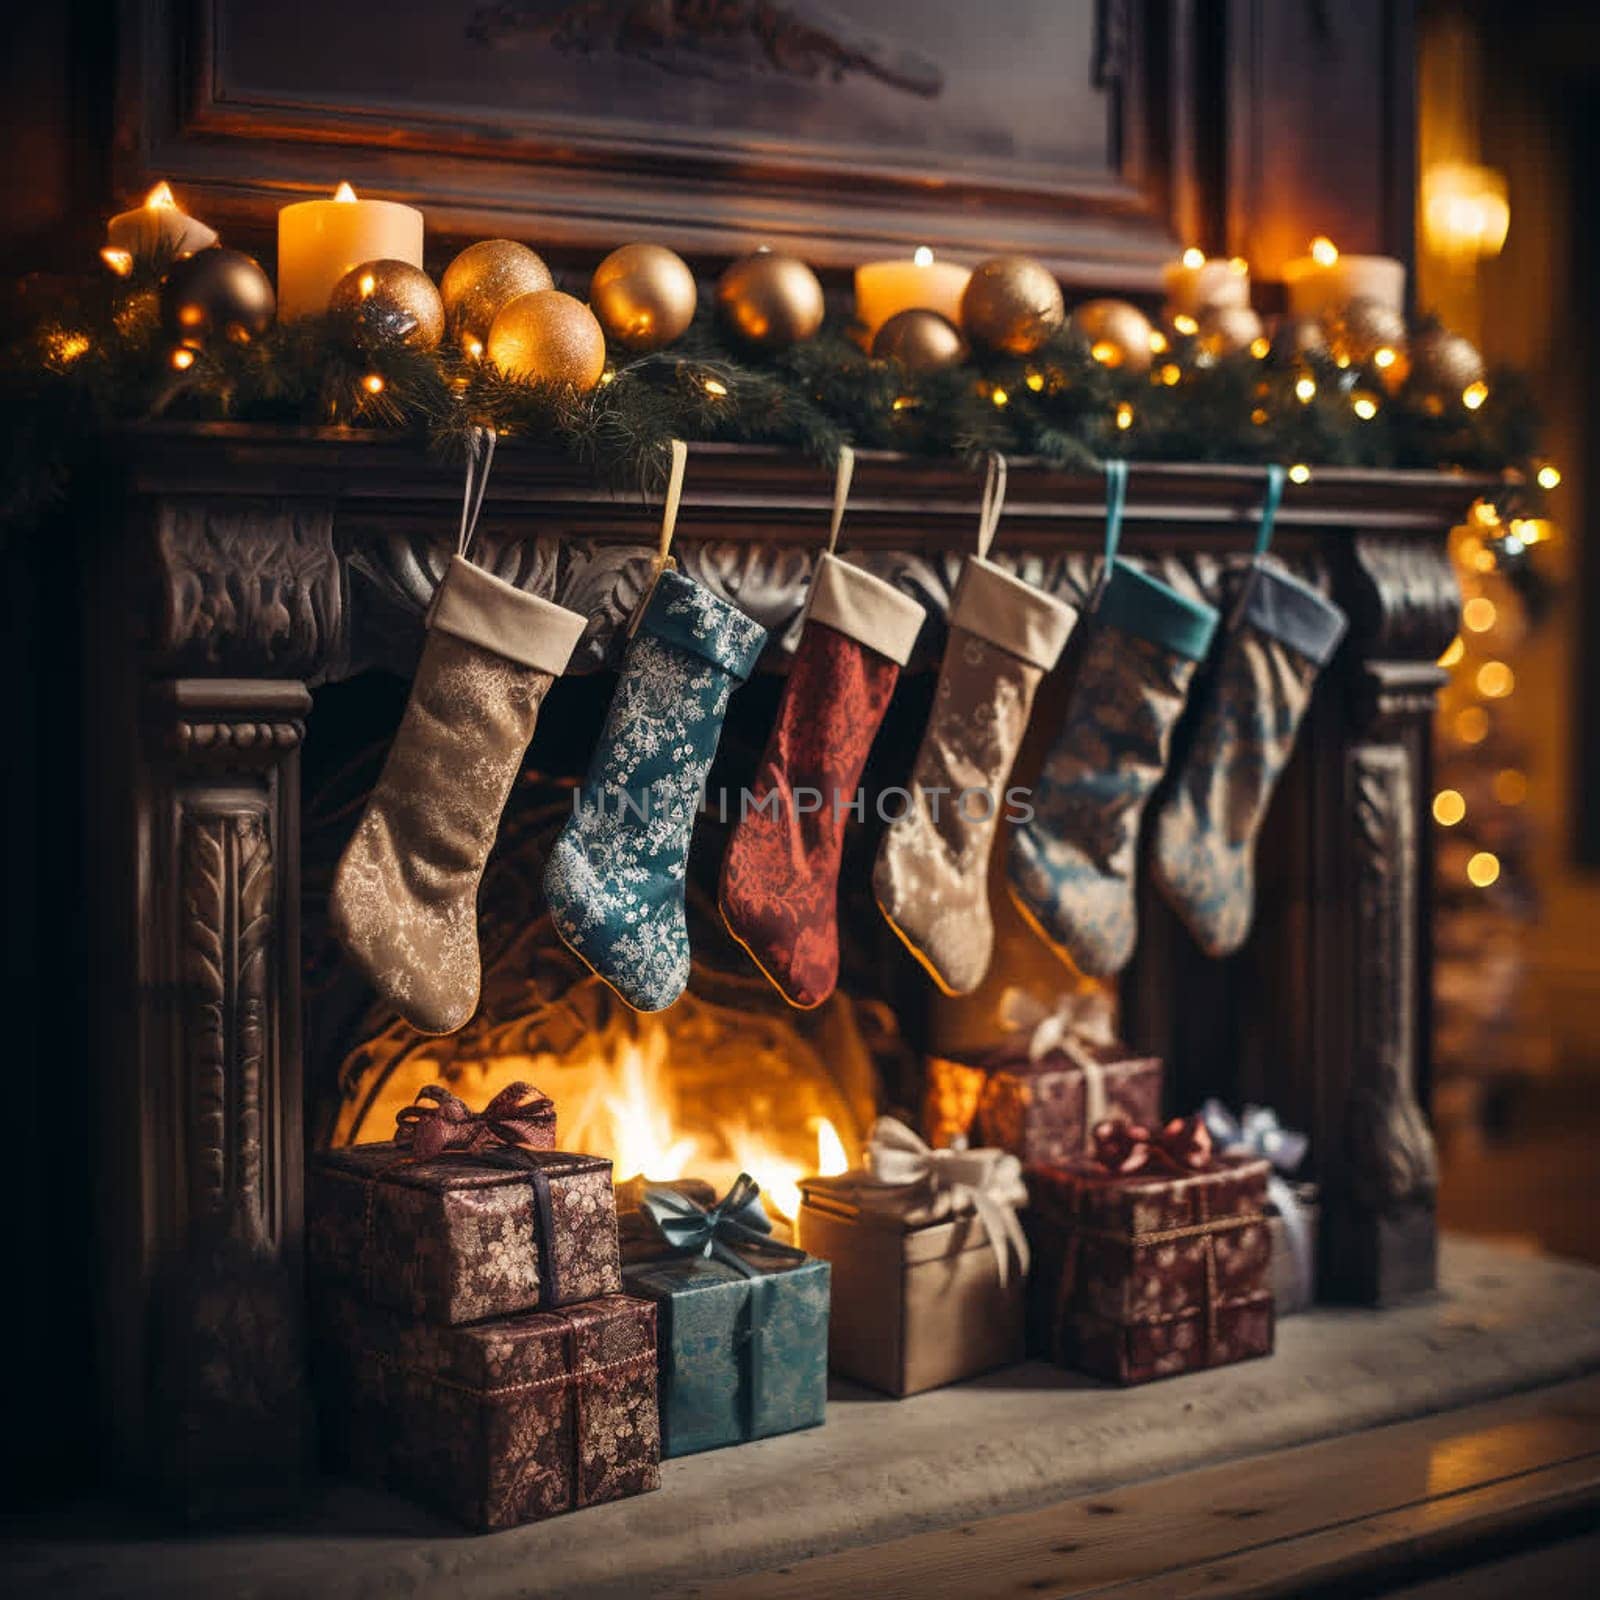 Christmas Socks With Gifts Near Fireplace In Festive Decorated Living Room. High quality photo